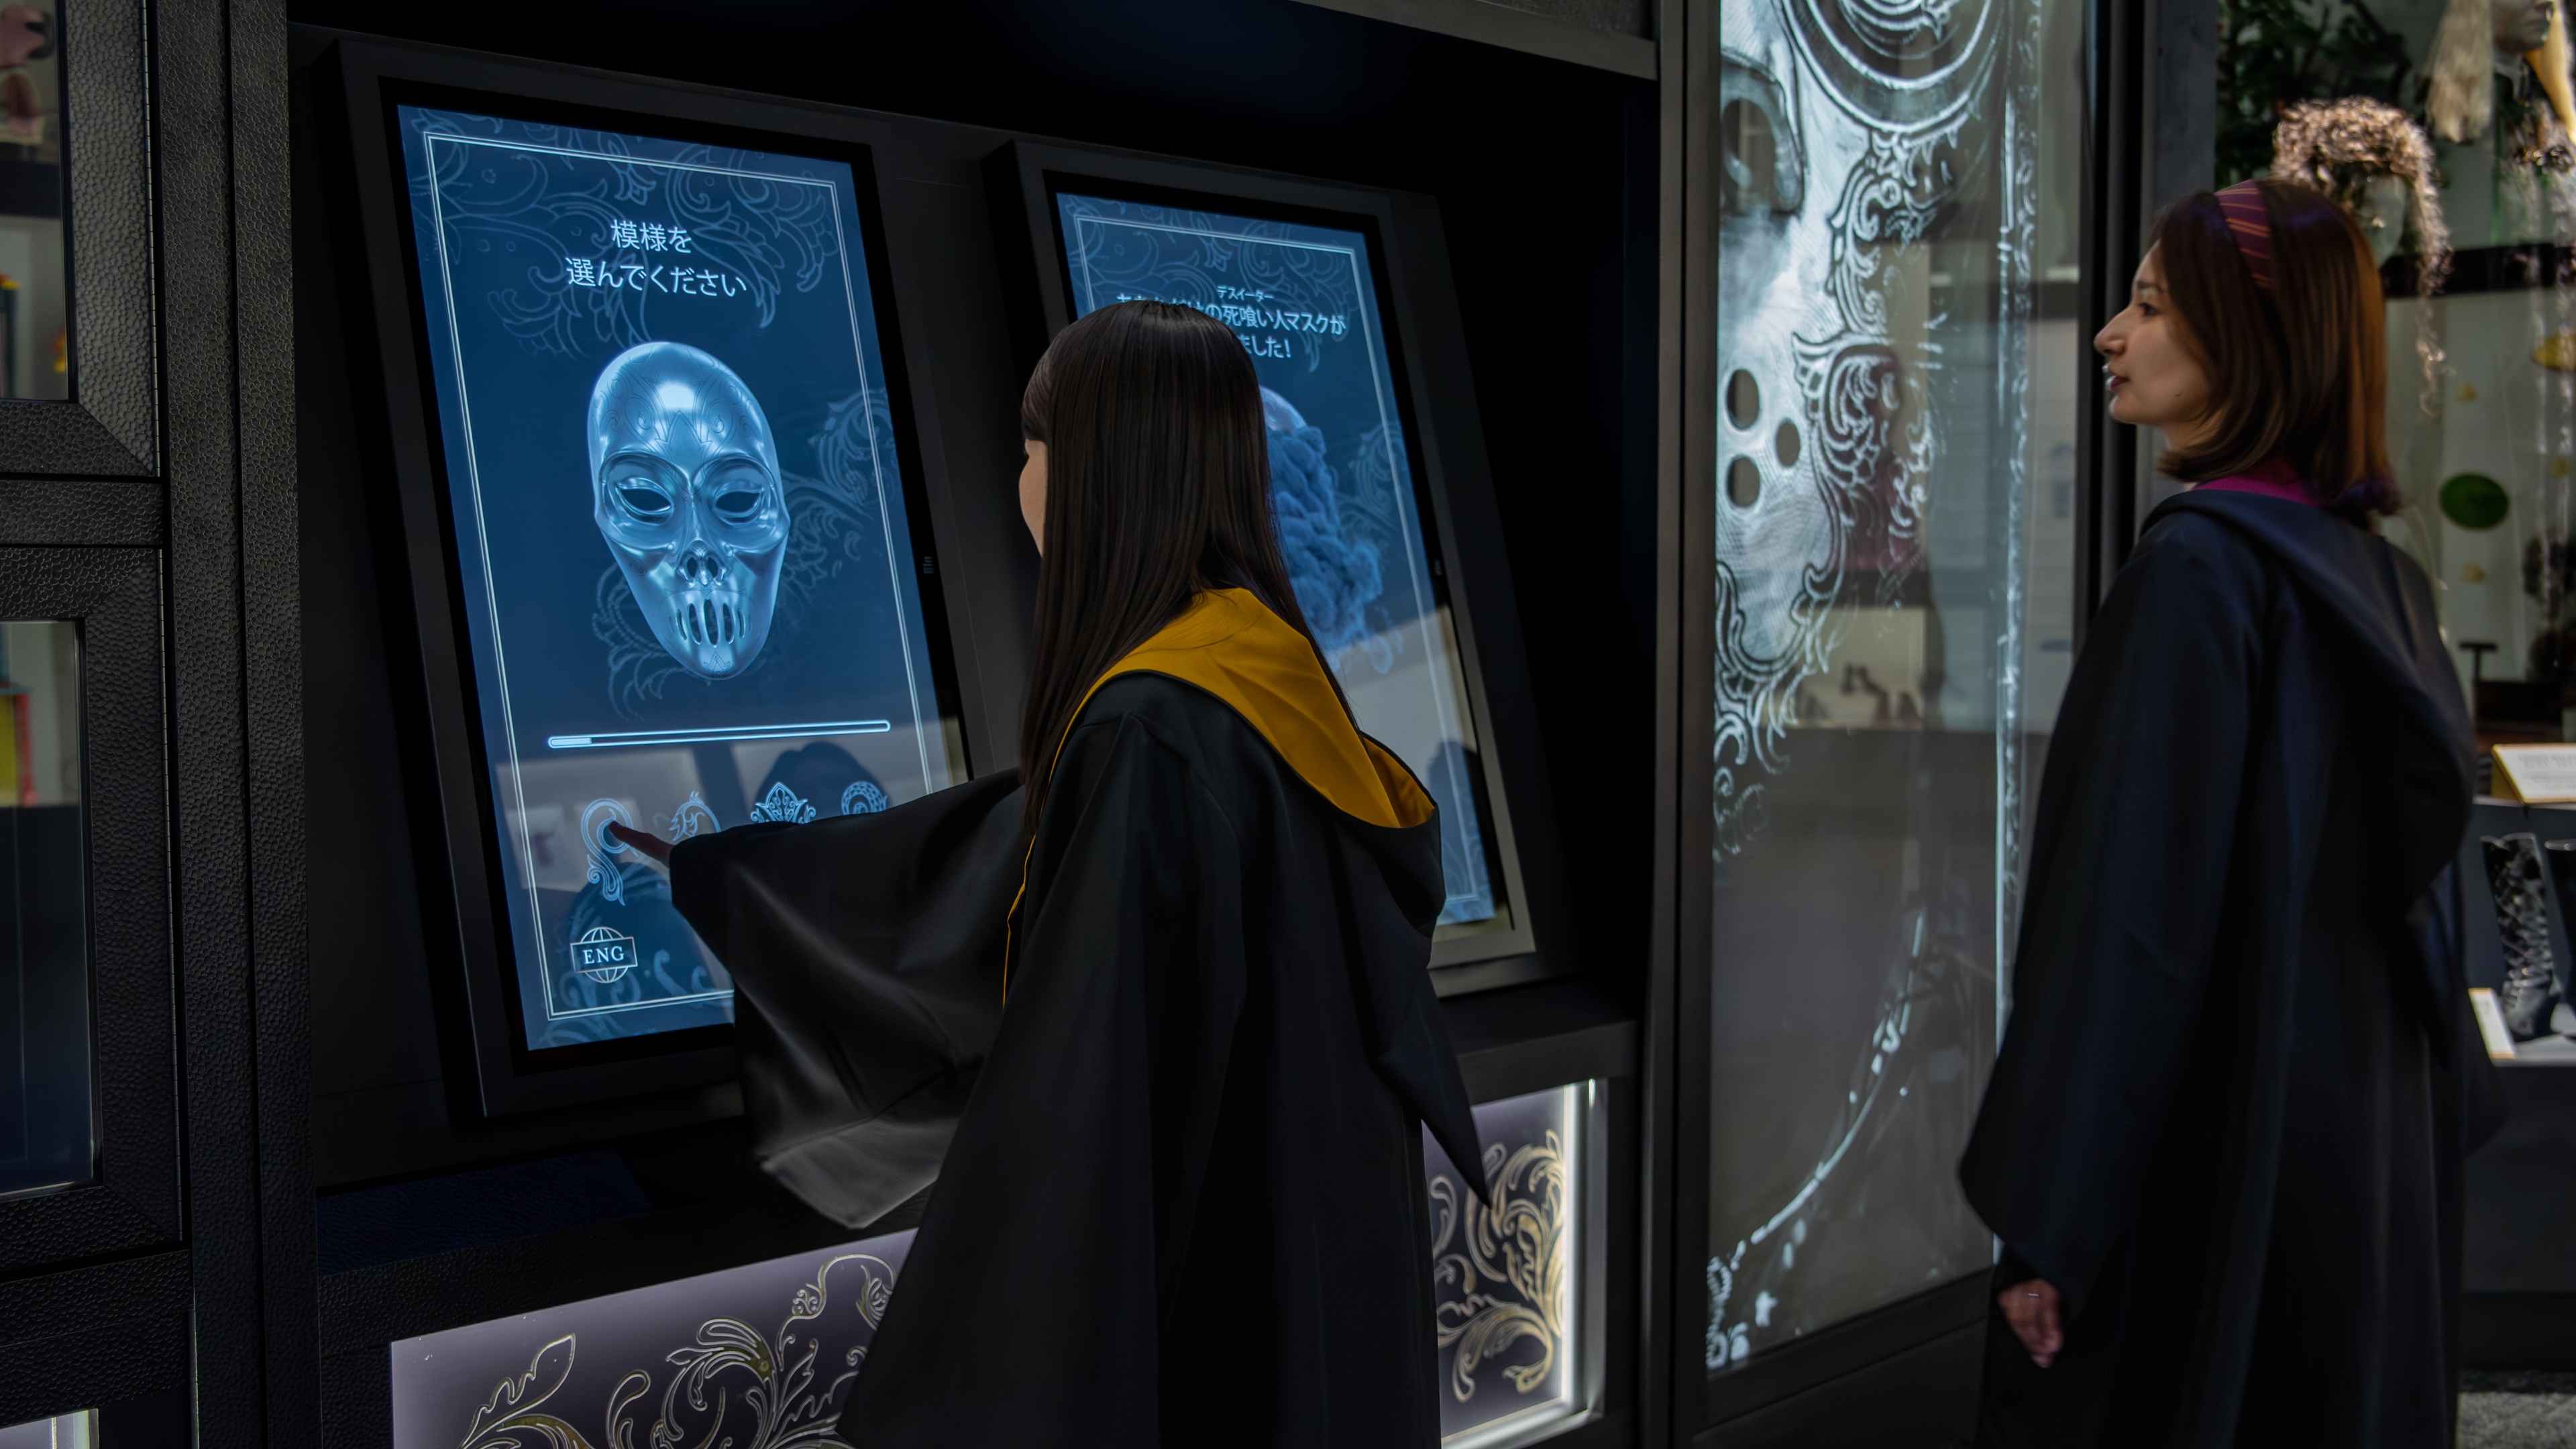 People in Wizards costumes engaging with interactive screen at Harry Potter experience